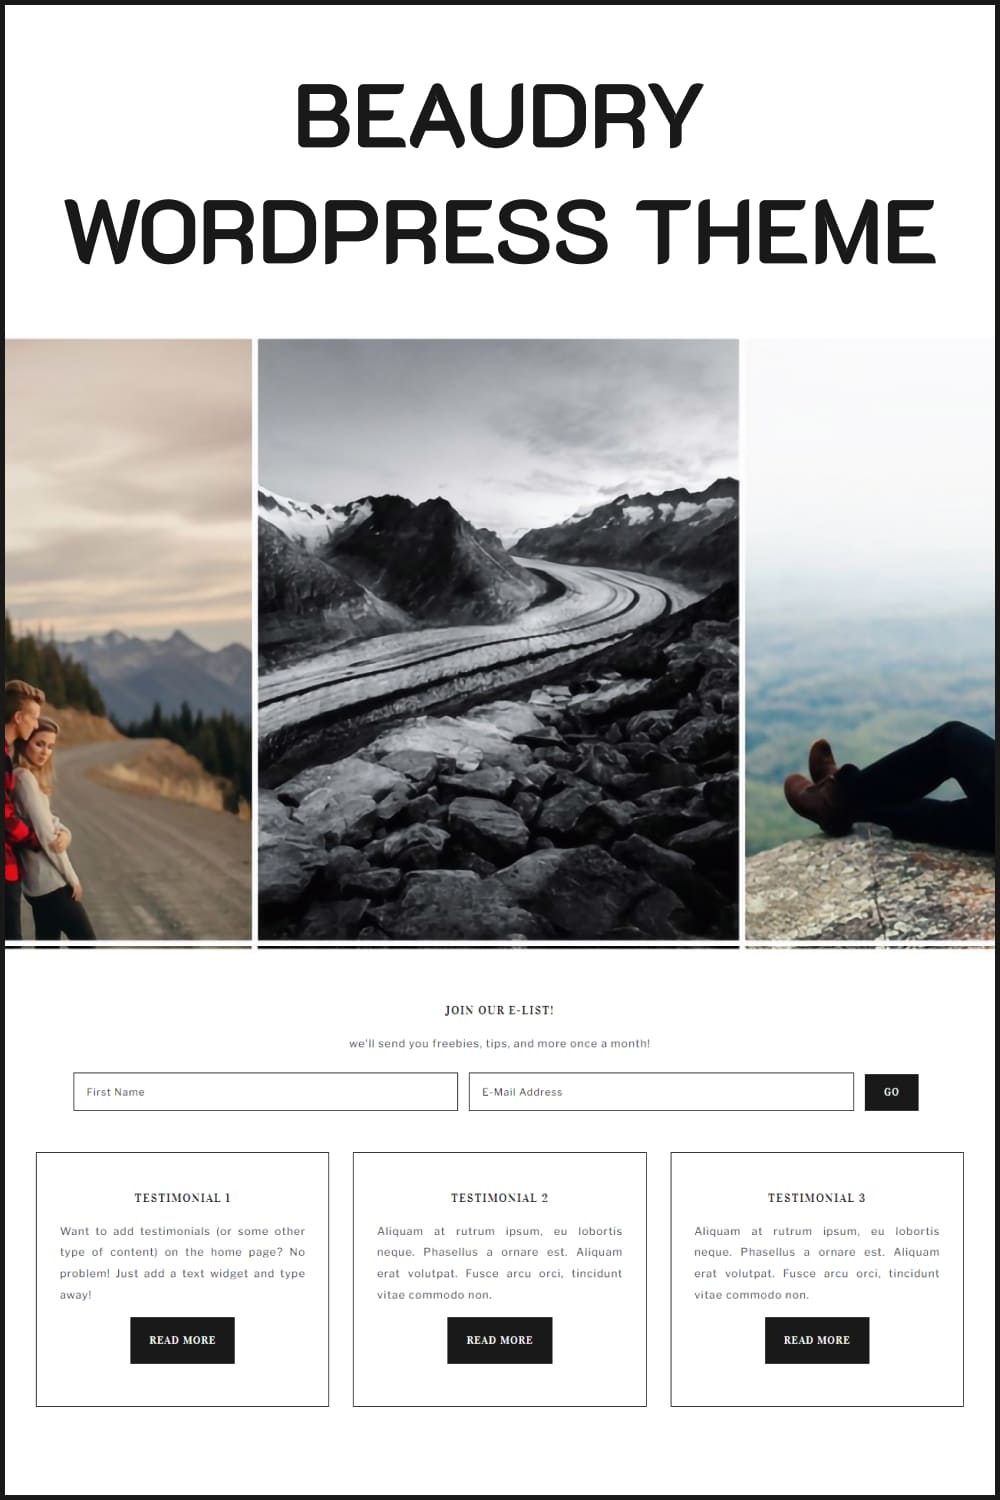 Beaudry Wordpress Theme, picture for pinterest 1000x1500.